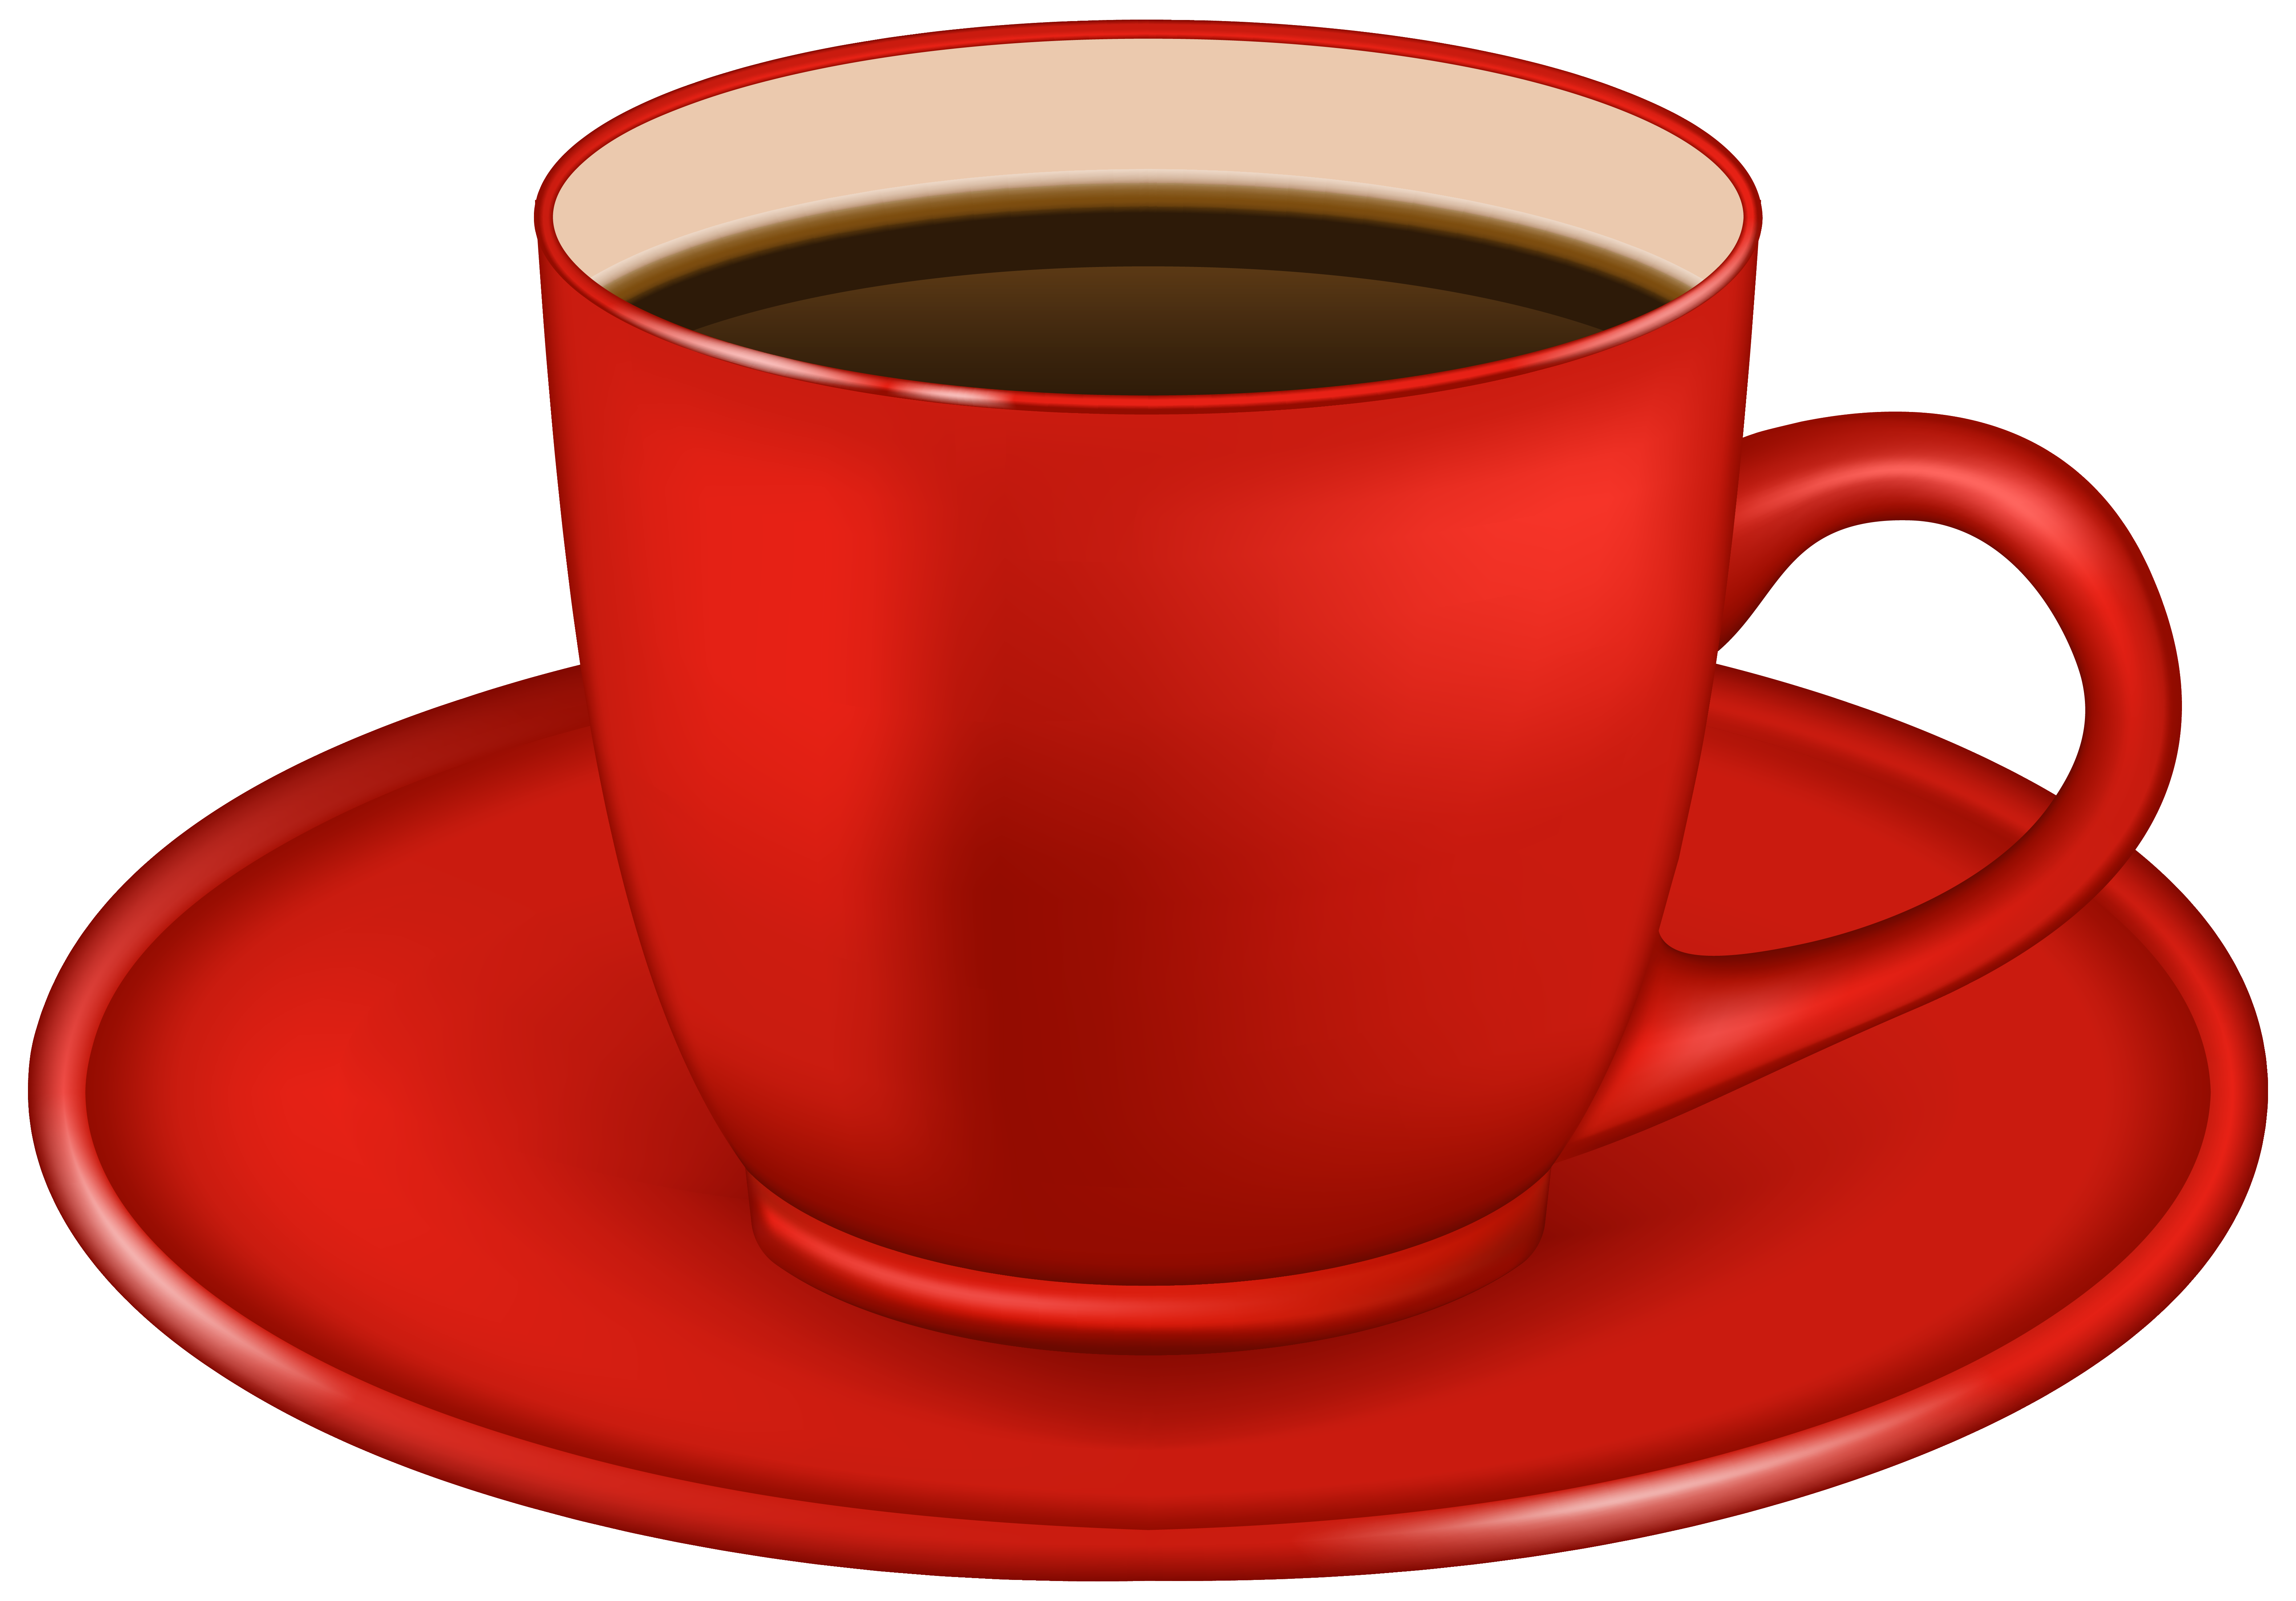 Red Coffee Cup PNG Clipart Image